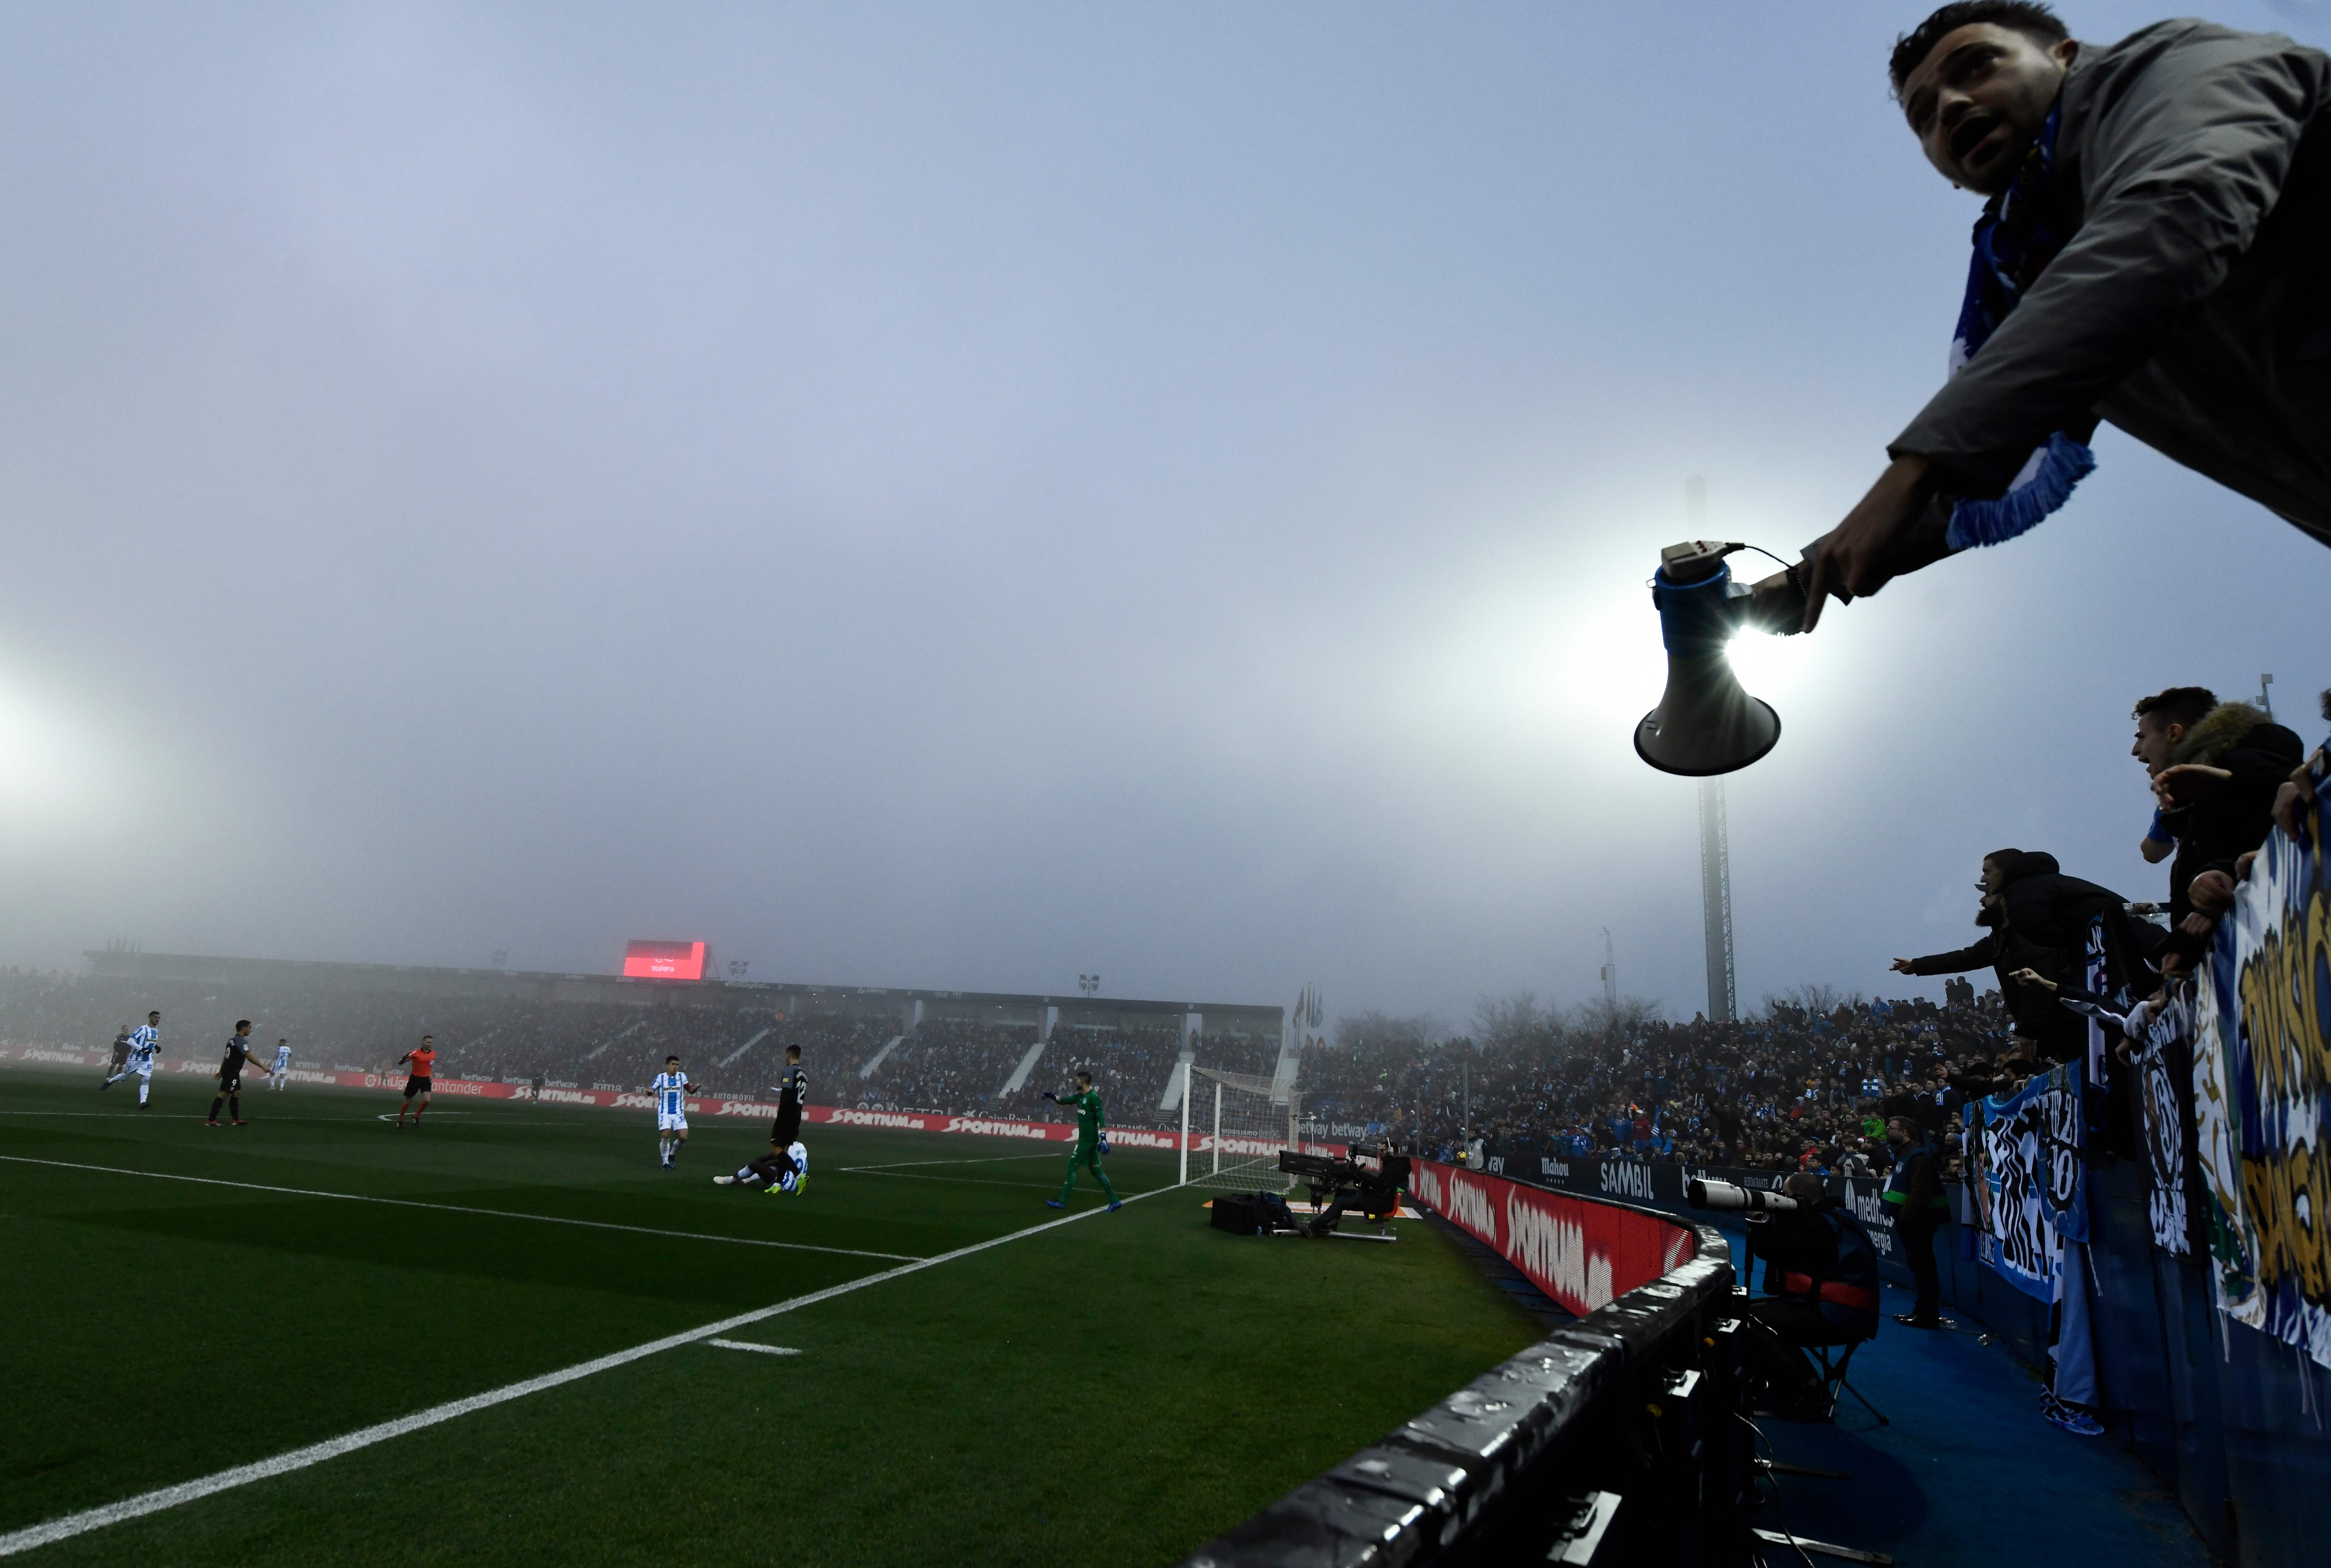 A Leganes fan holds a megaphone during the Spanish League football match between Club Deportivo Leganes SAD and Sevilla FC at the Estadio Municipal Butarque in Leganes on Decemeber 23, 2018. (Photo by OSCAR DEL POZO / AFP)        (Photo credit should read OSCAR DEL POZO/AFP via Getty Images)